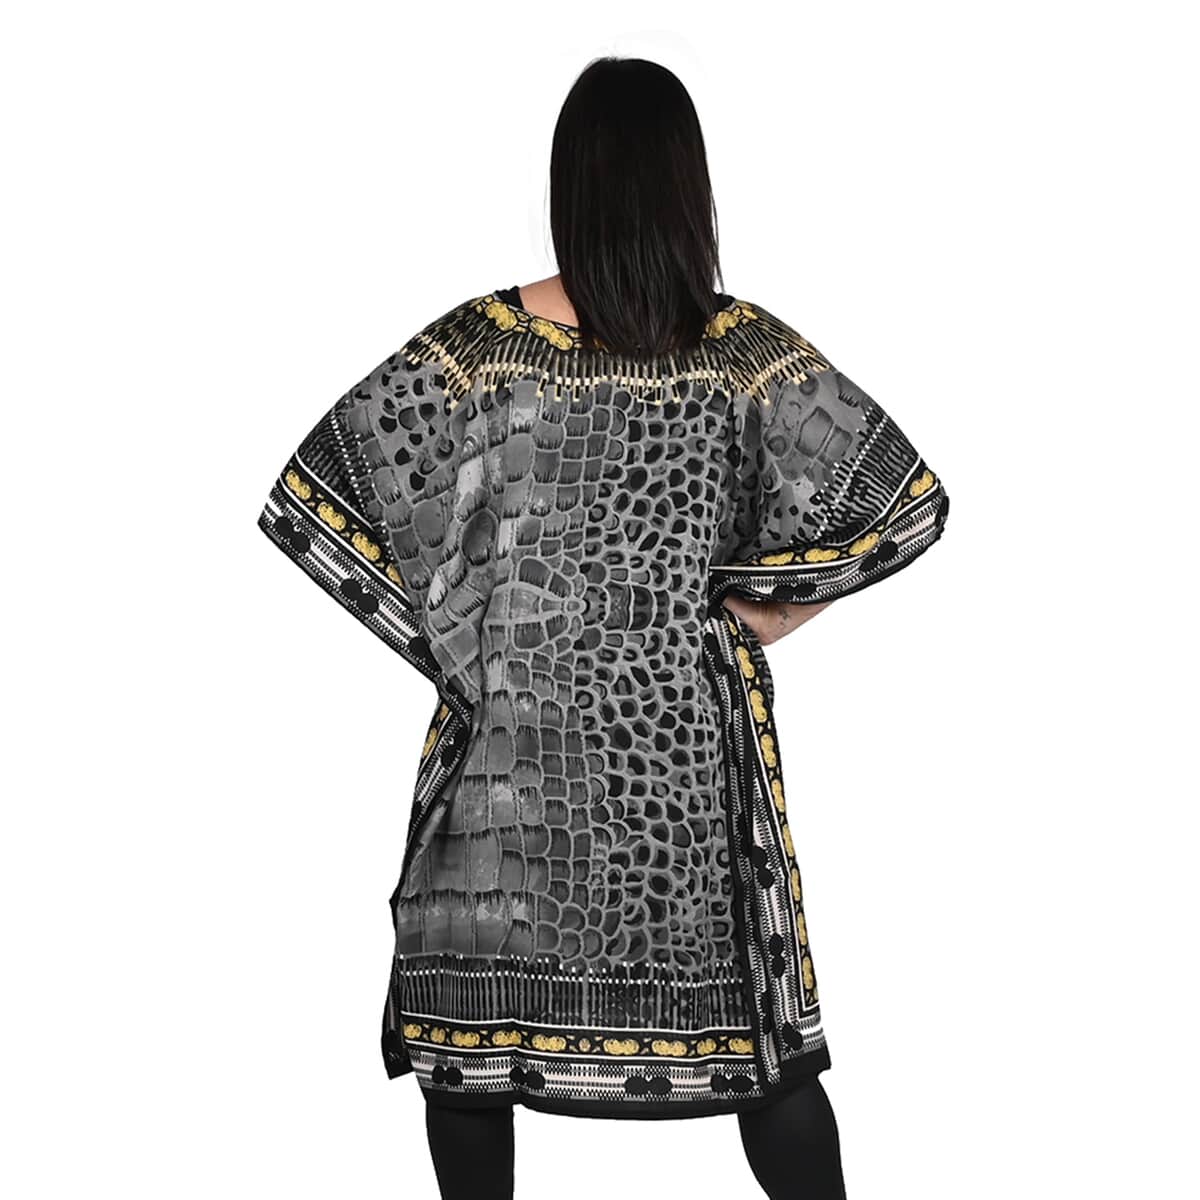 PICK OF THE SHOW JOVIE Grey Reptile/Leopard V-Neck Kaftan - One Size Fits Most image number 1